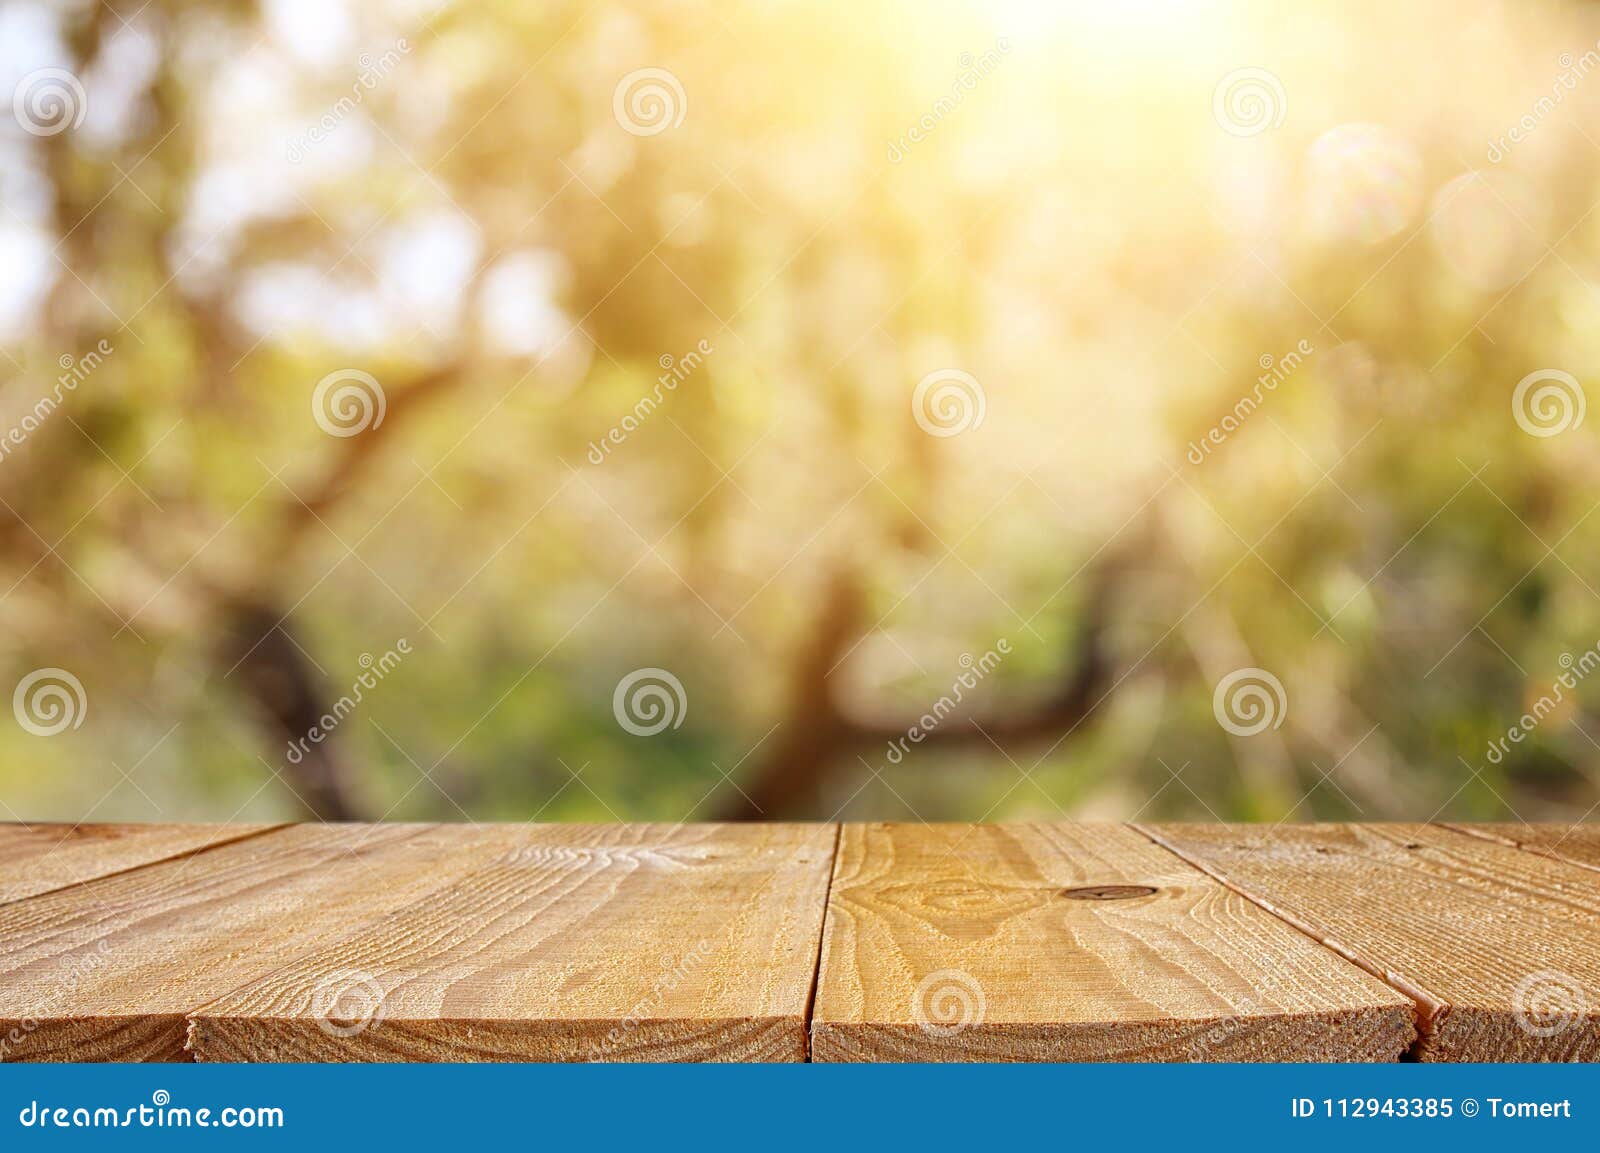 empty rustic table in front of green spring abstract bokeh background. product display and picnic concept.